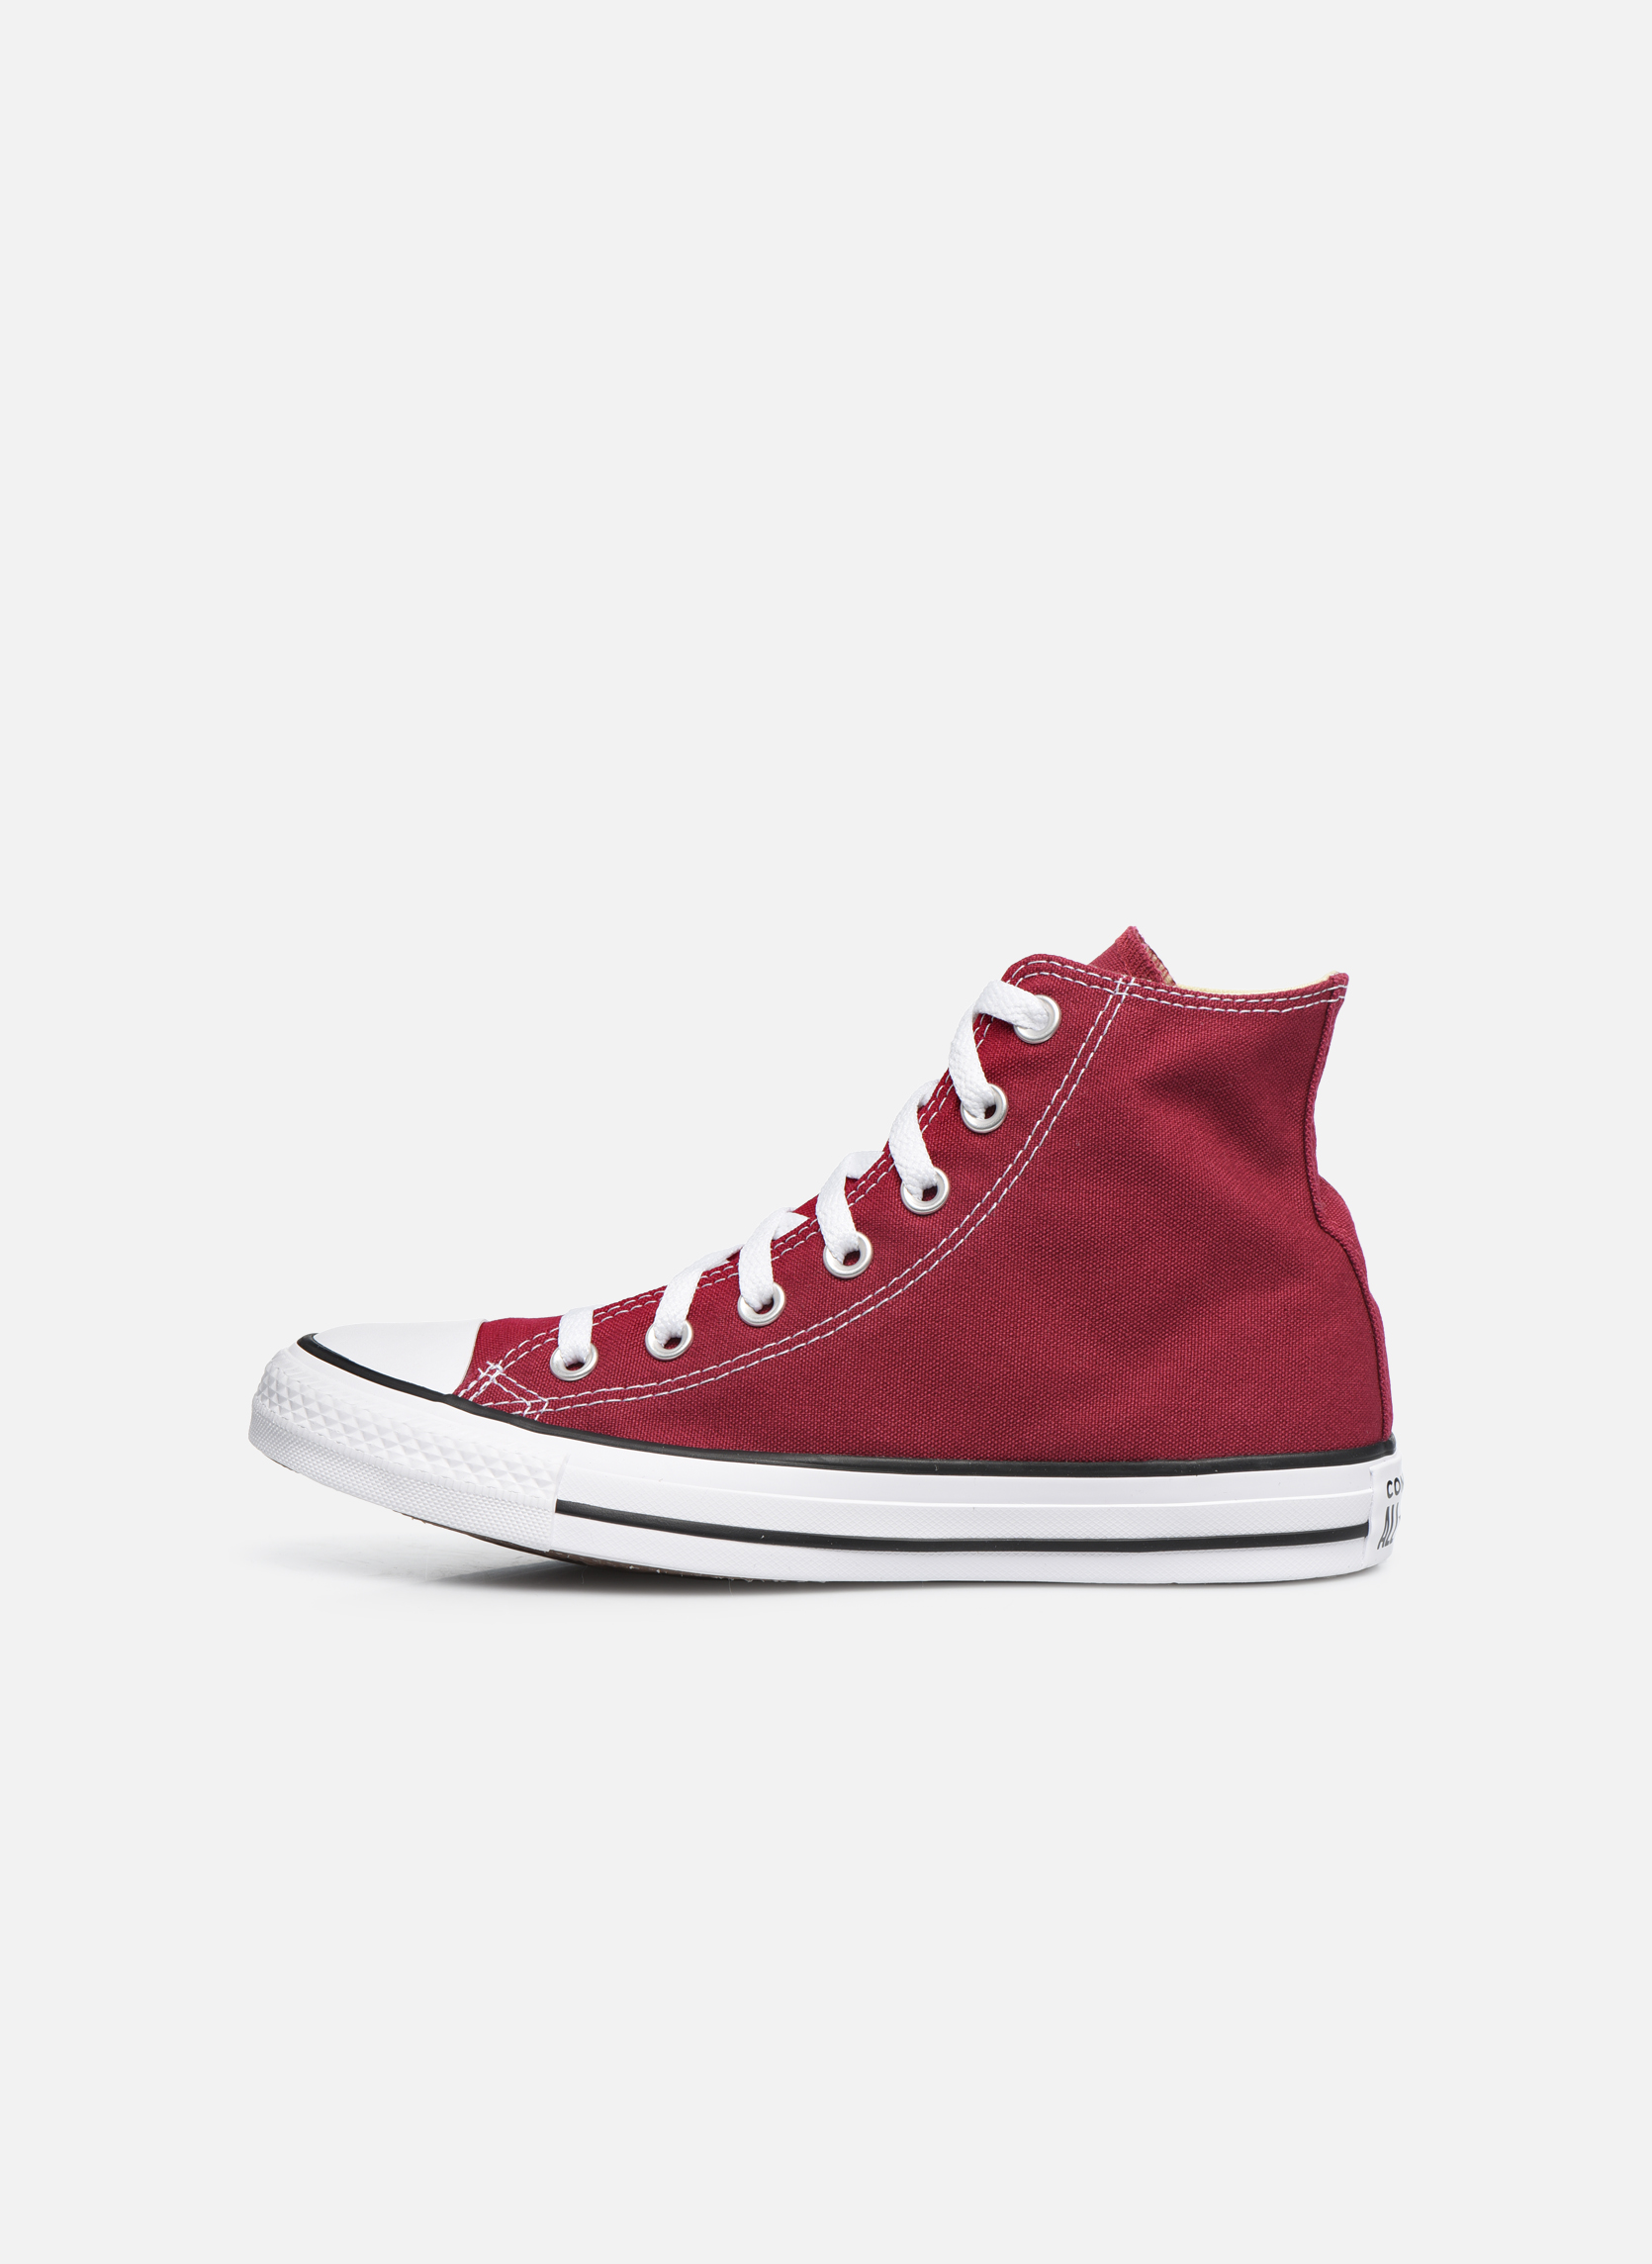 Converse Chuck Taylor All Star Seasonal Hi Trainers in Burgundy at ...